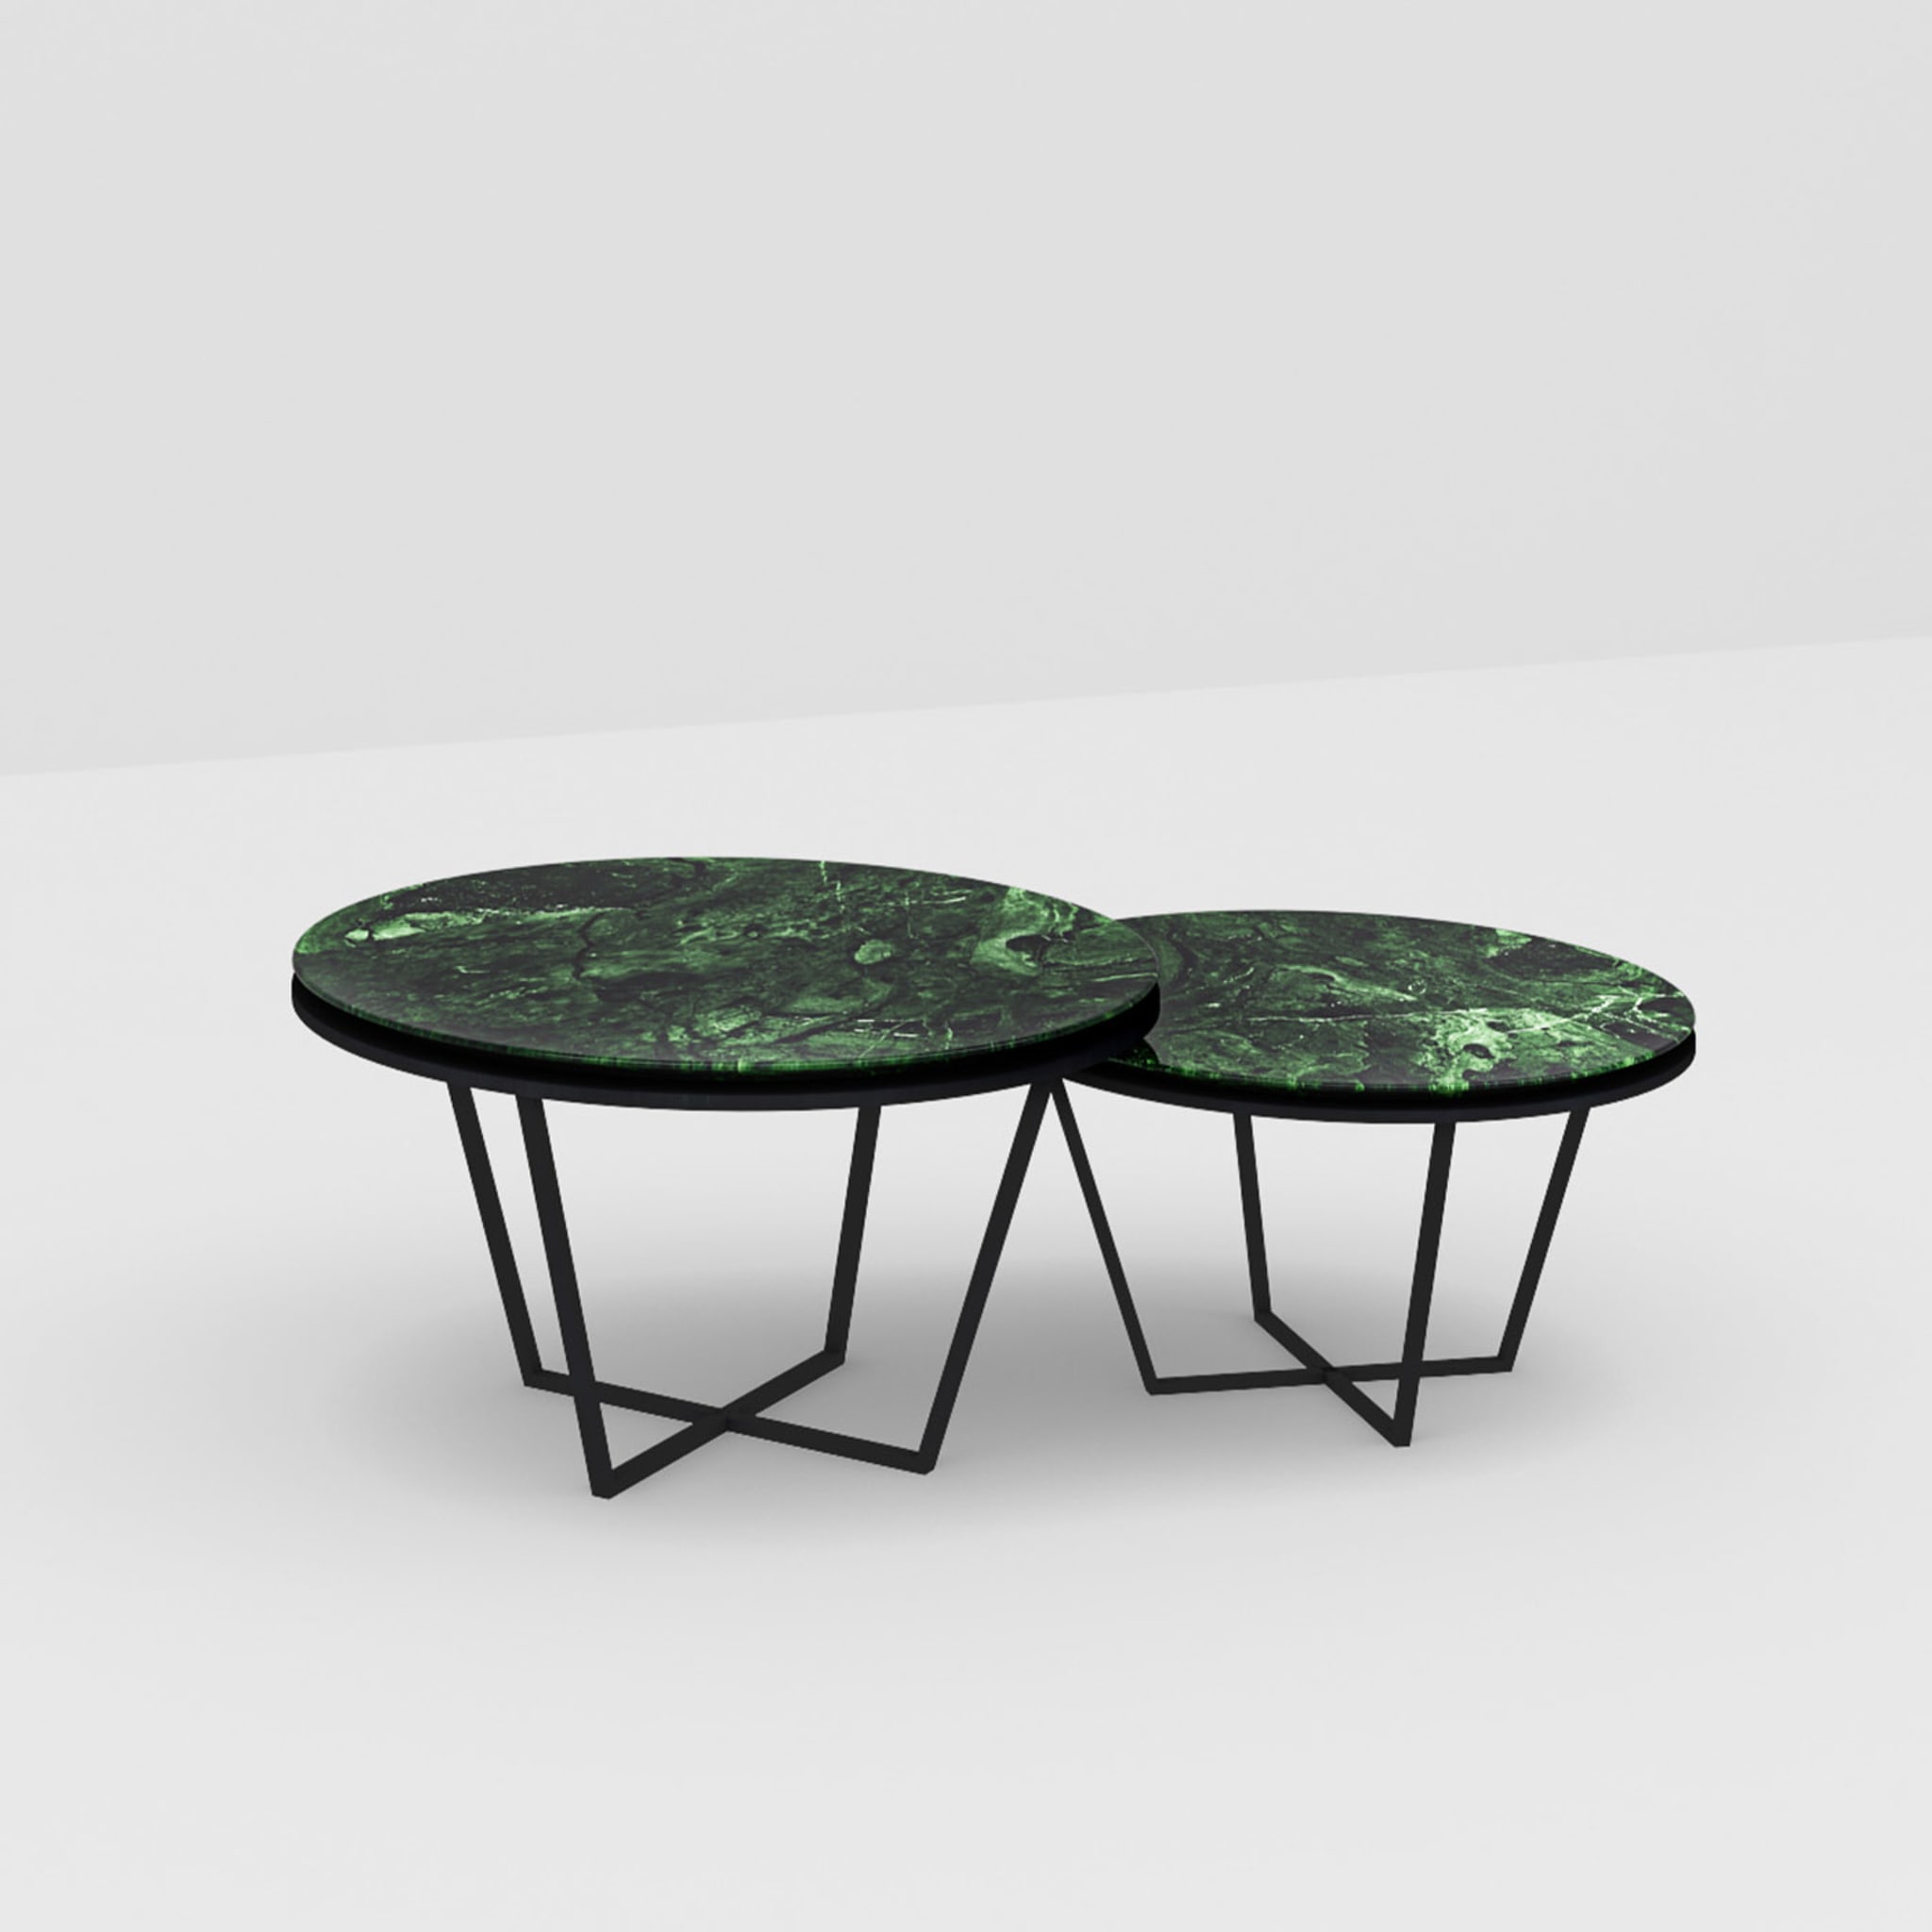 Set of 2 Different-Height Round Verde Alpi Marble Coffee Tables - Alternative view 2